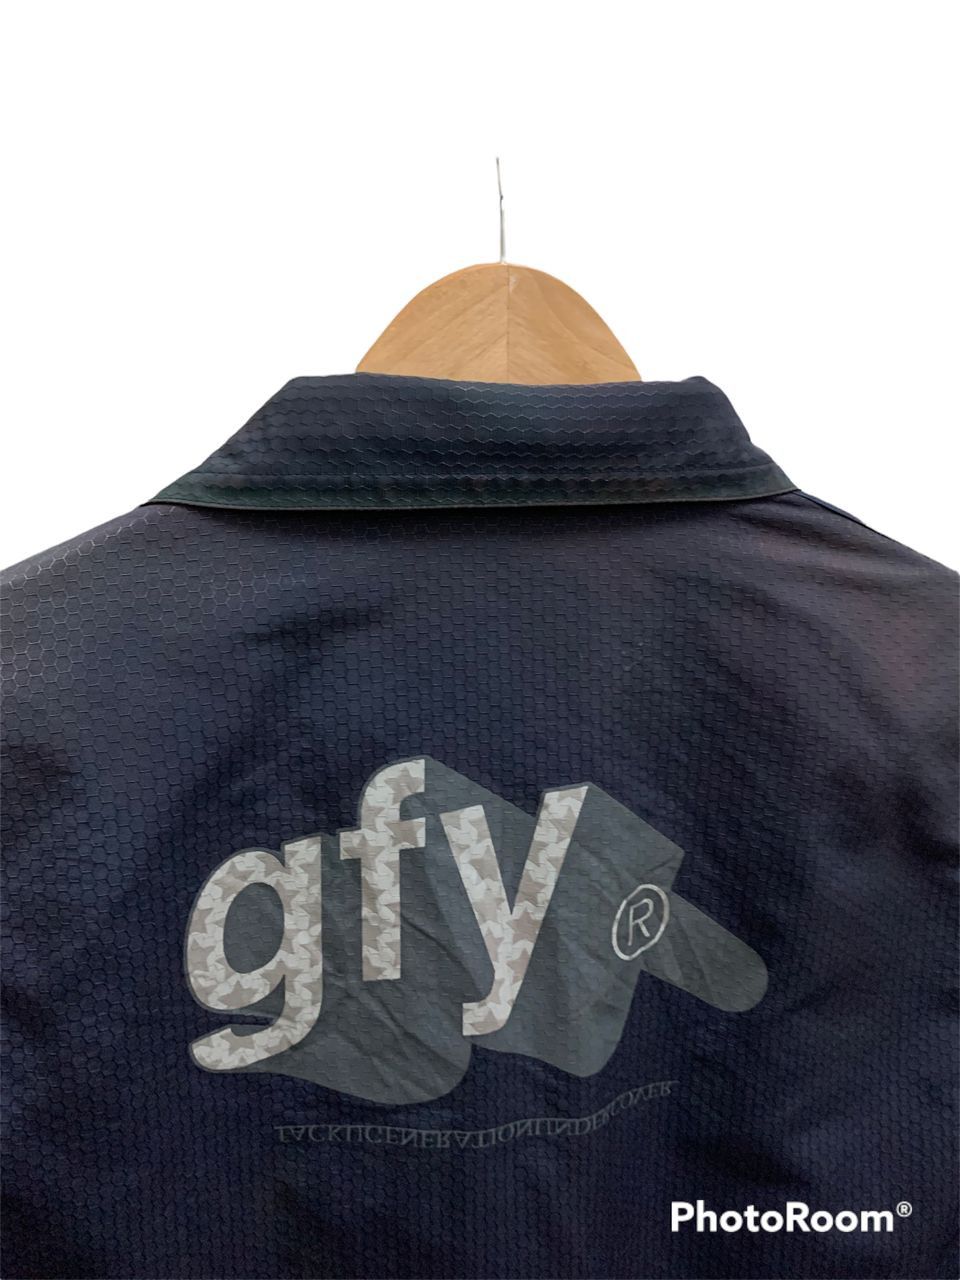 AW01 Undercover “Generation Fuck You” GFY M-65 Jacket - 4